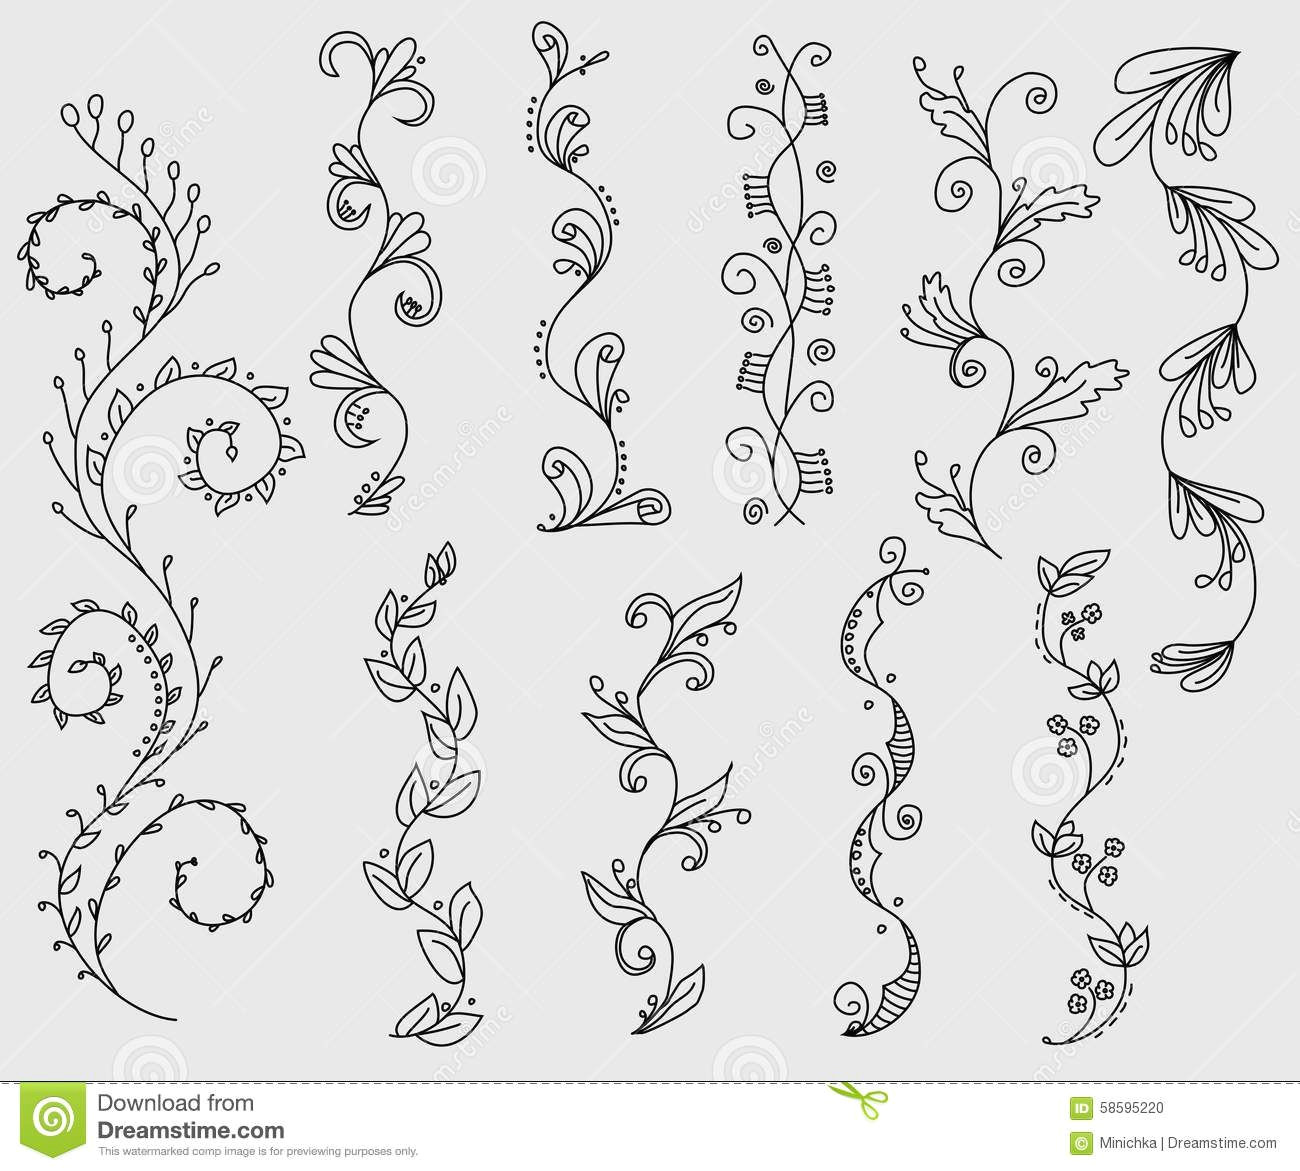 Easy to Draw Flowers and Vines Photo About Set Of Floral Whimsical Vine Hand Drawn Borders